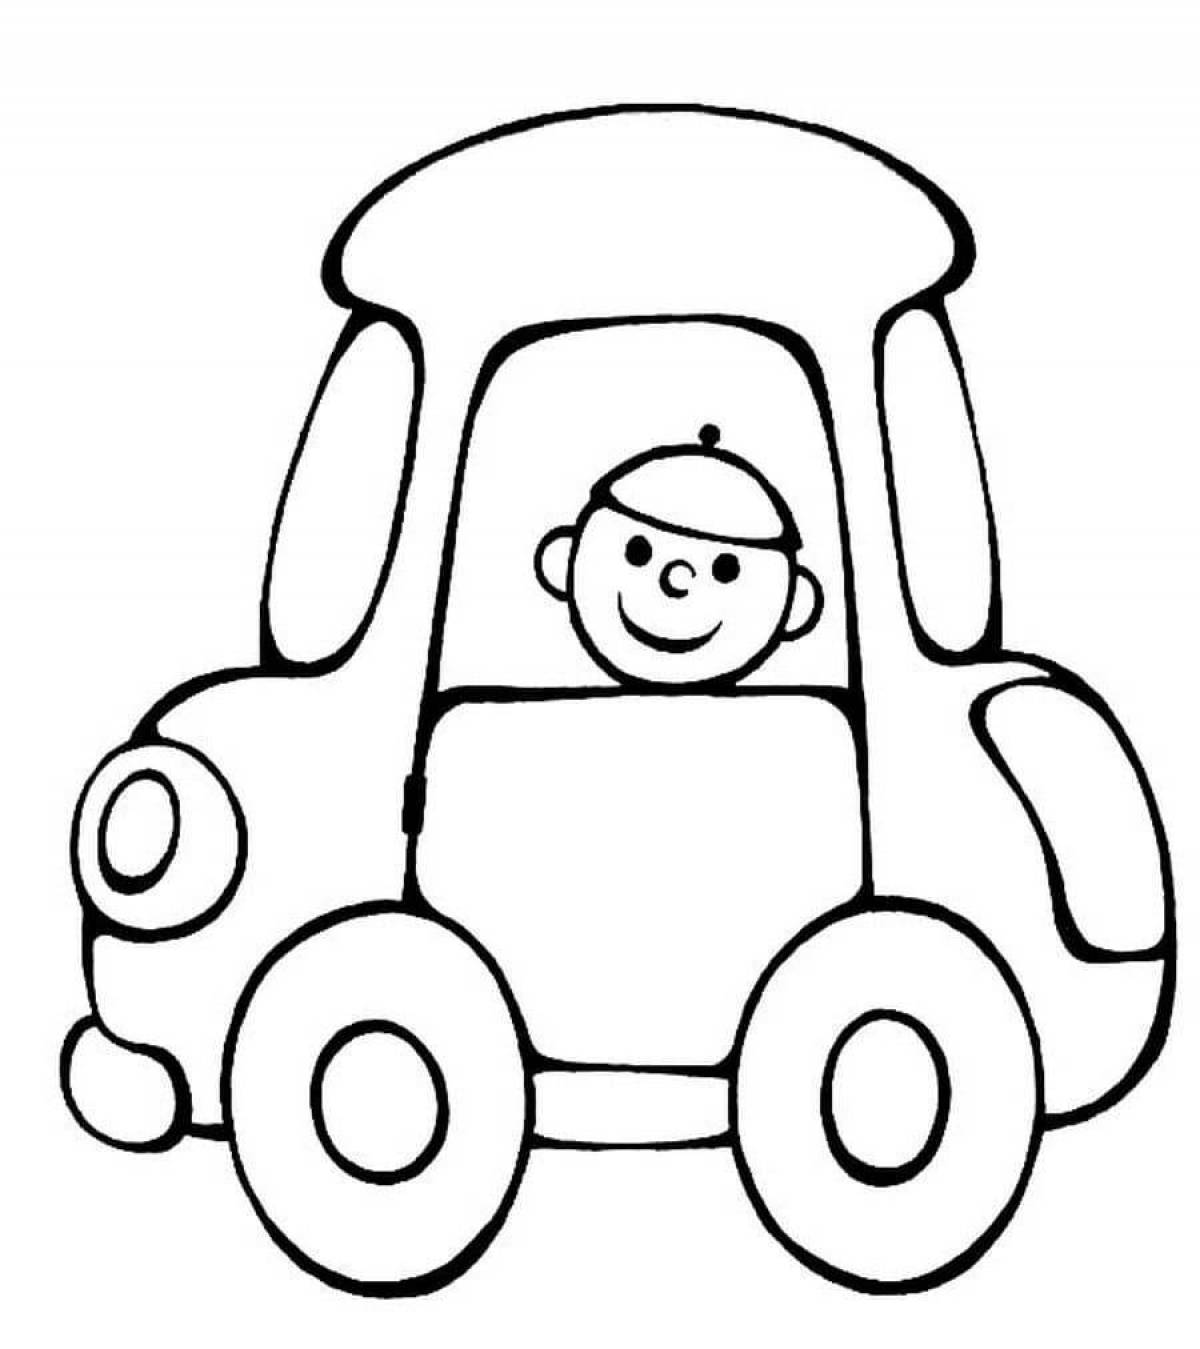 Exciting coloring pages for boys 3-4 years old